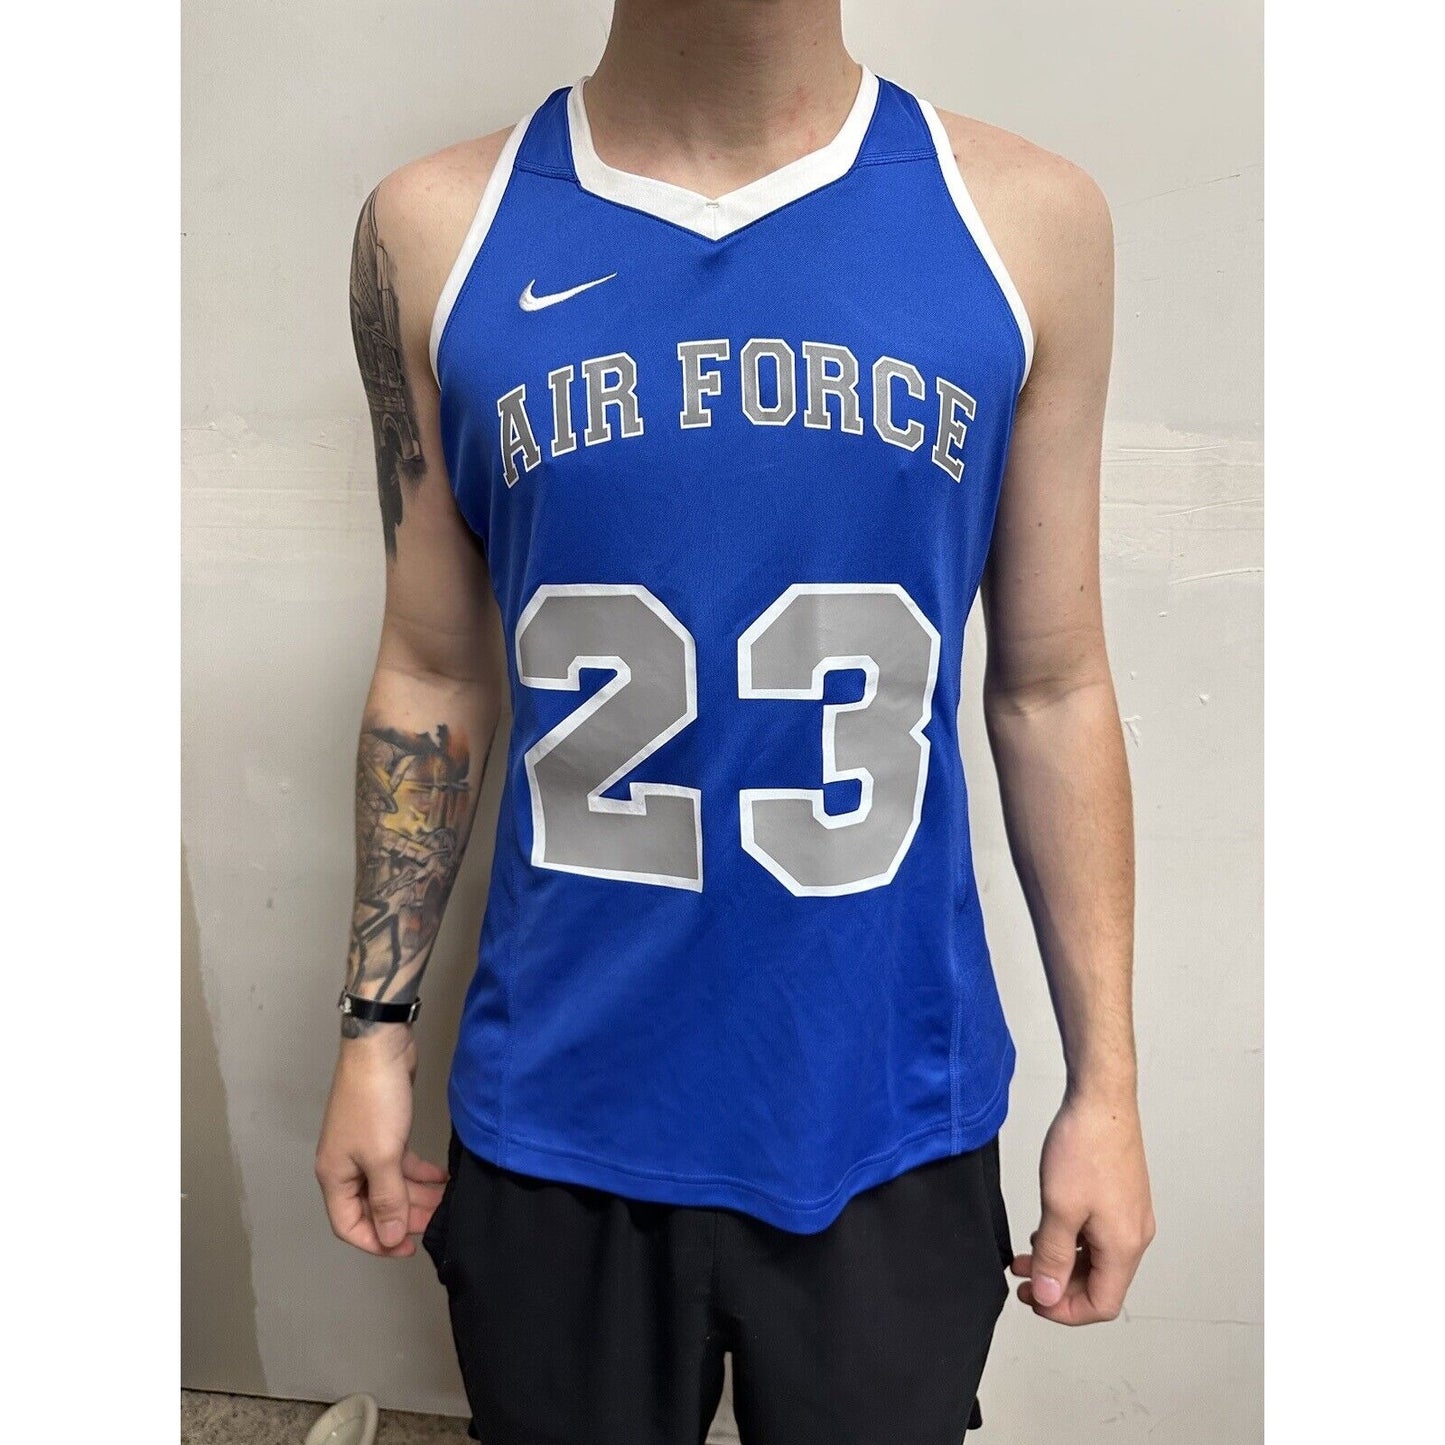 Men’s  Large Nike Dri-fit USAFA Air Force Academy Jersey Tank Top Athletic